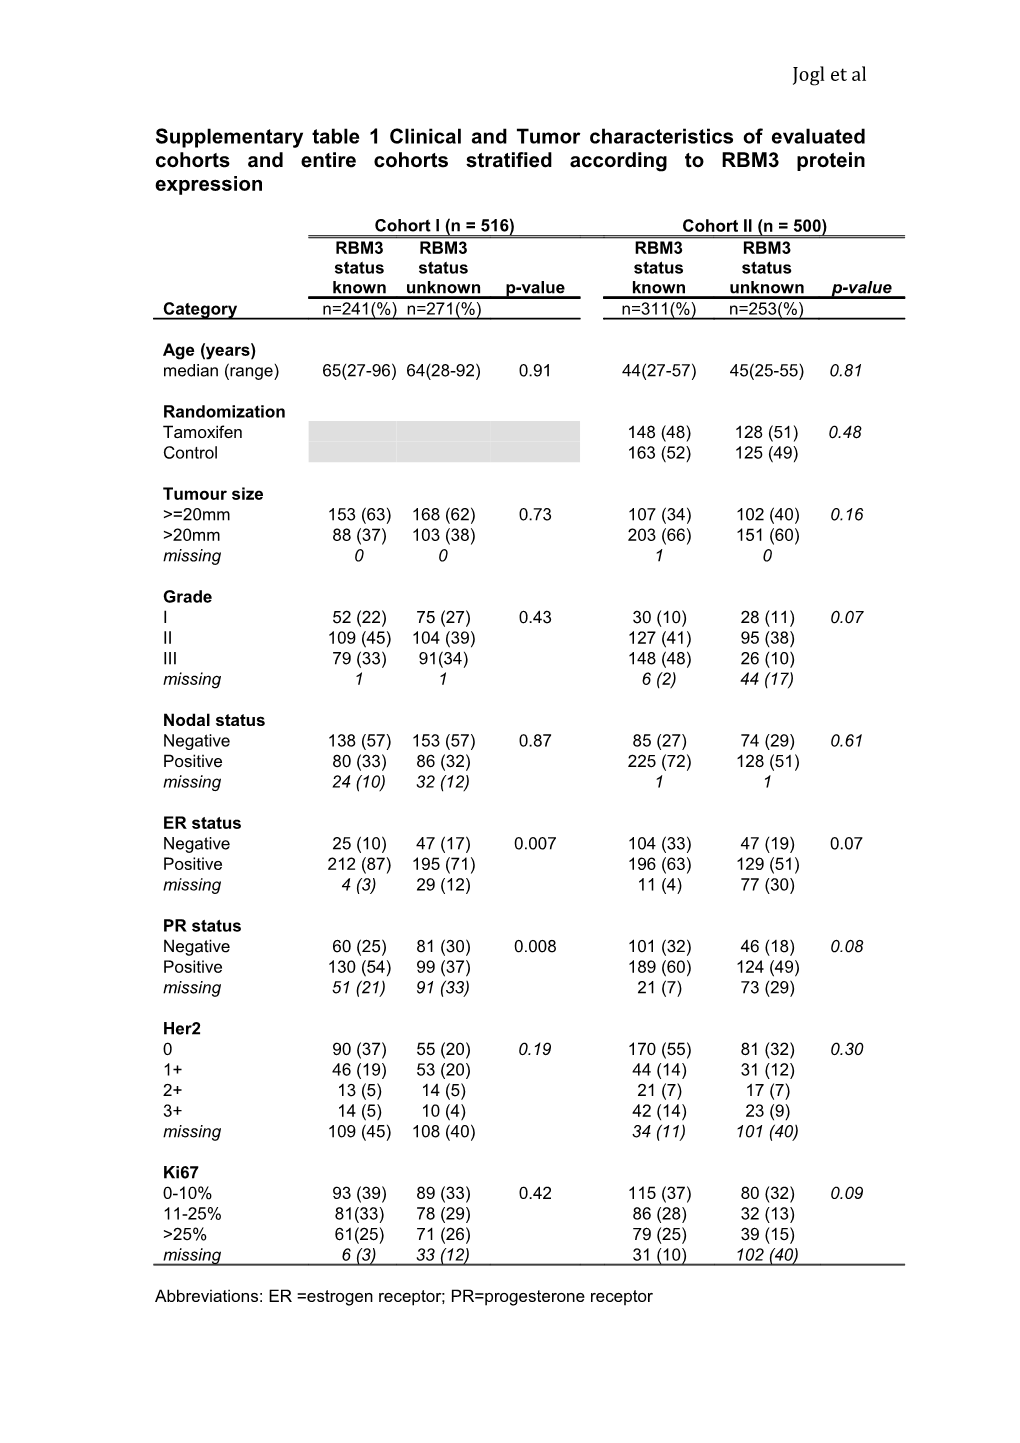 Supplementary Table 1 Clinical and Tumor Characteristics of Evaluated Cohorts and Entire